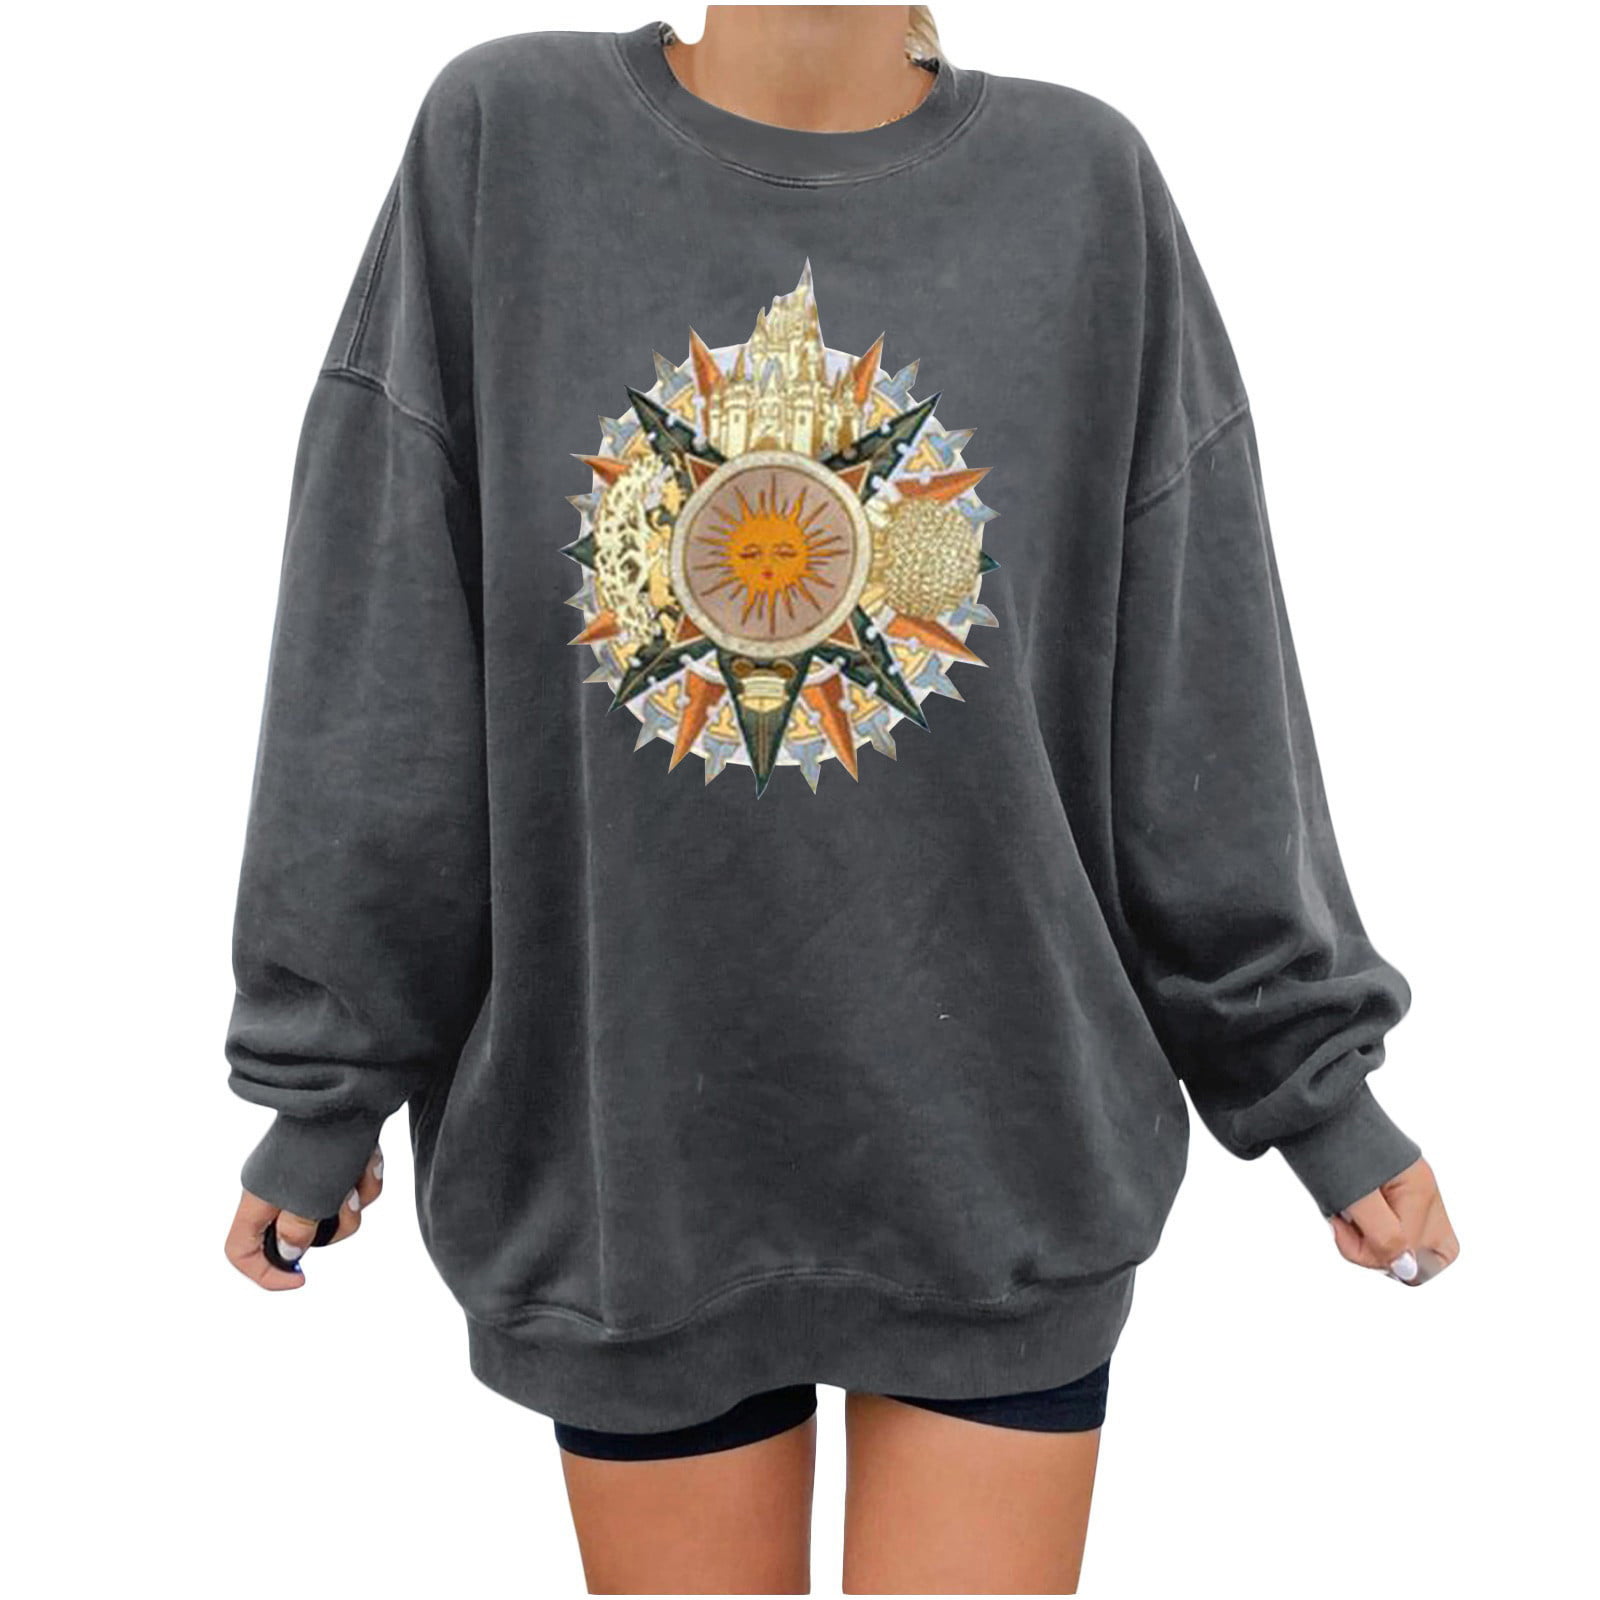 UJGYH Fashion Autumn Flower Print Sweatshirt Women Casual Solid Full Sleeve Stand-Neck Print Loose Blouse 